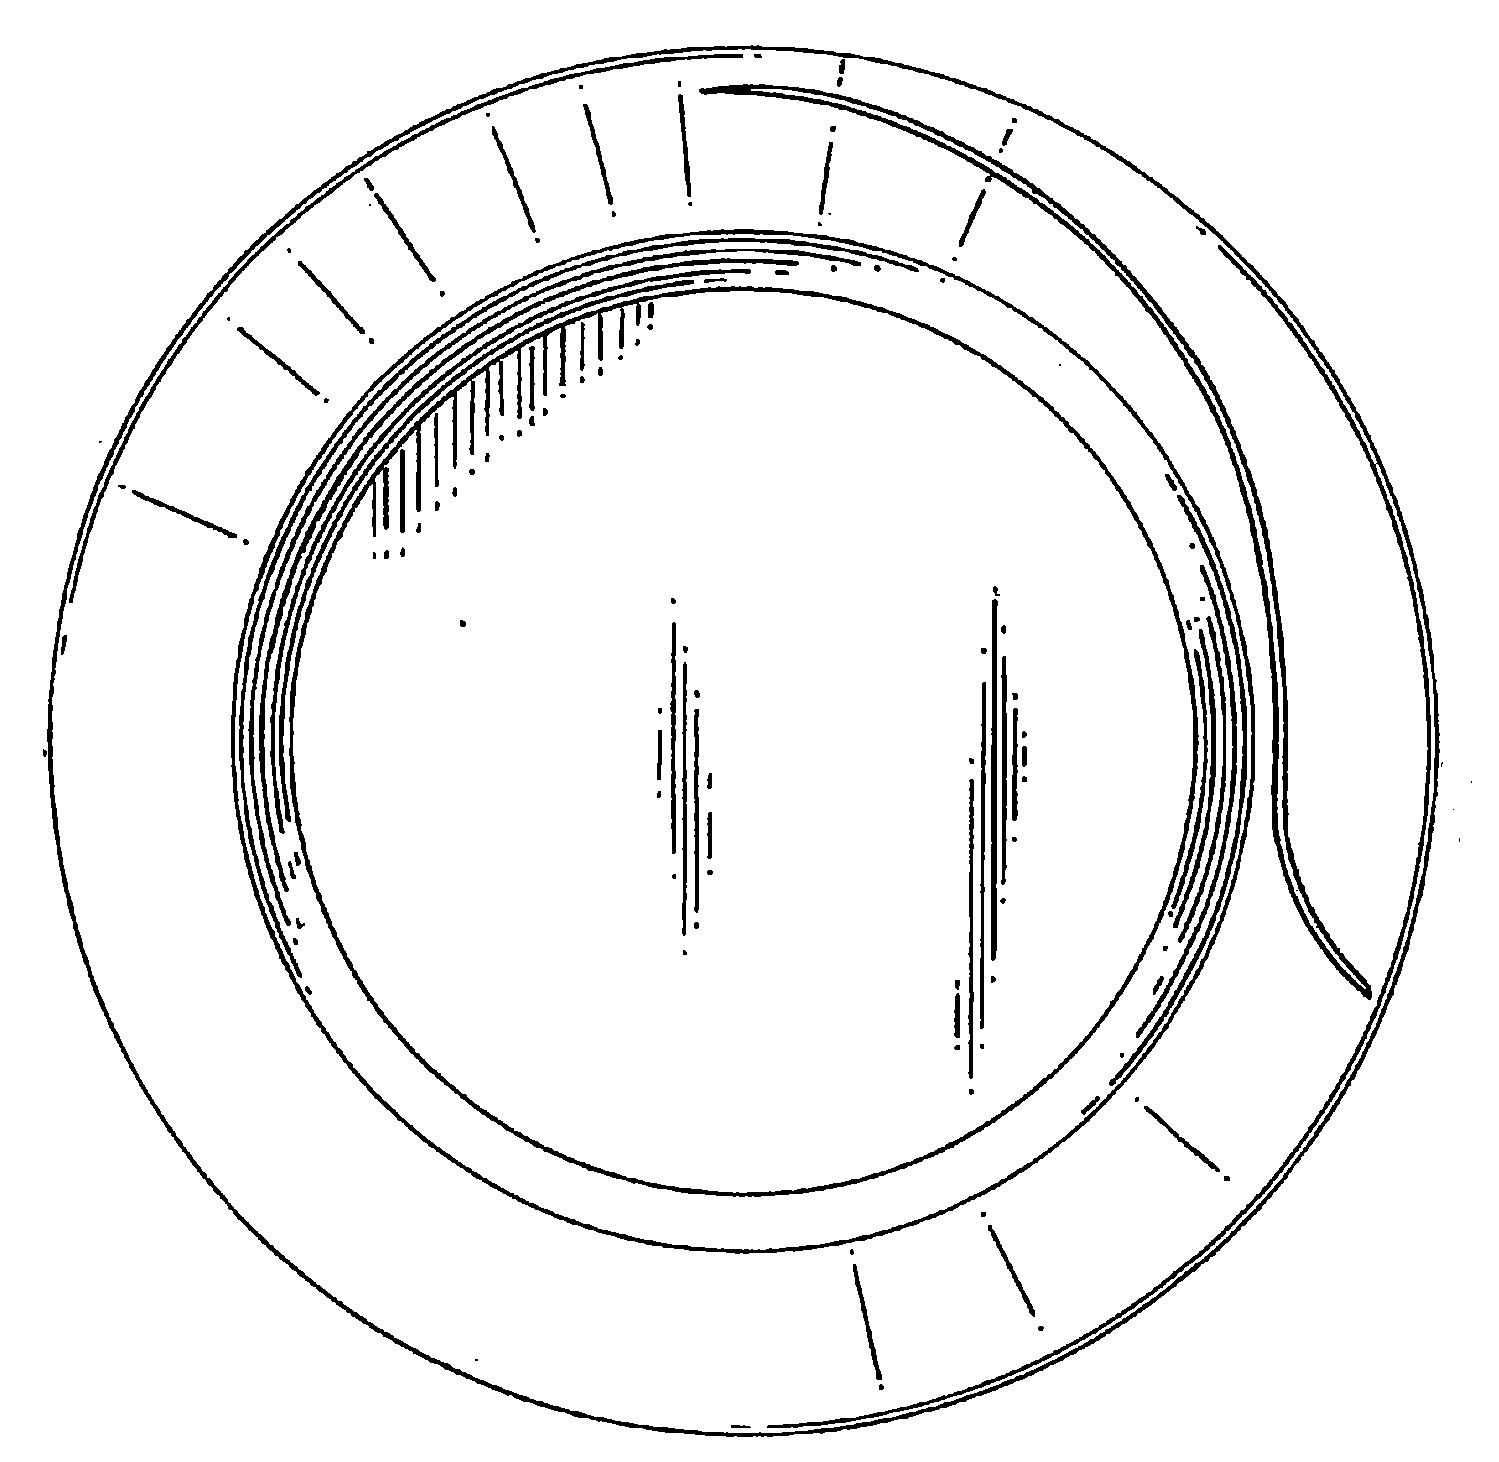 Example of a design for a food server that shows a peripheralor border pattern.
